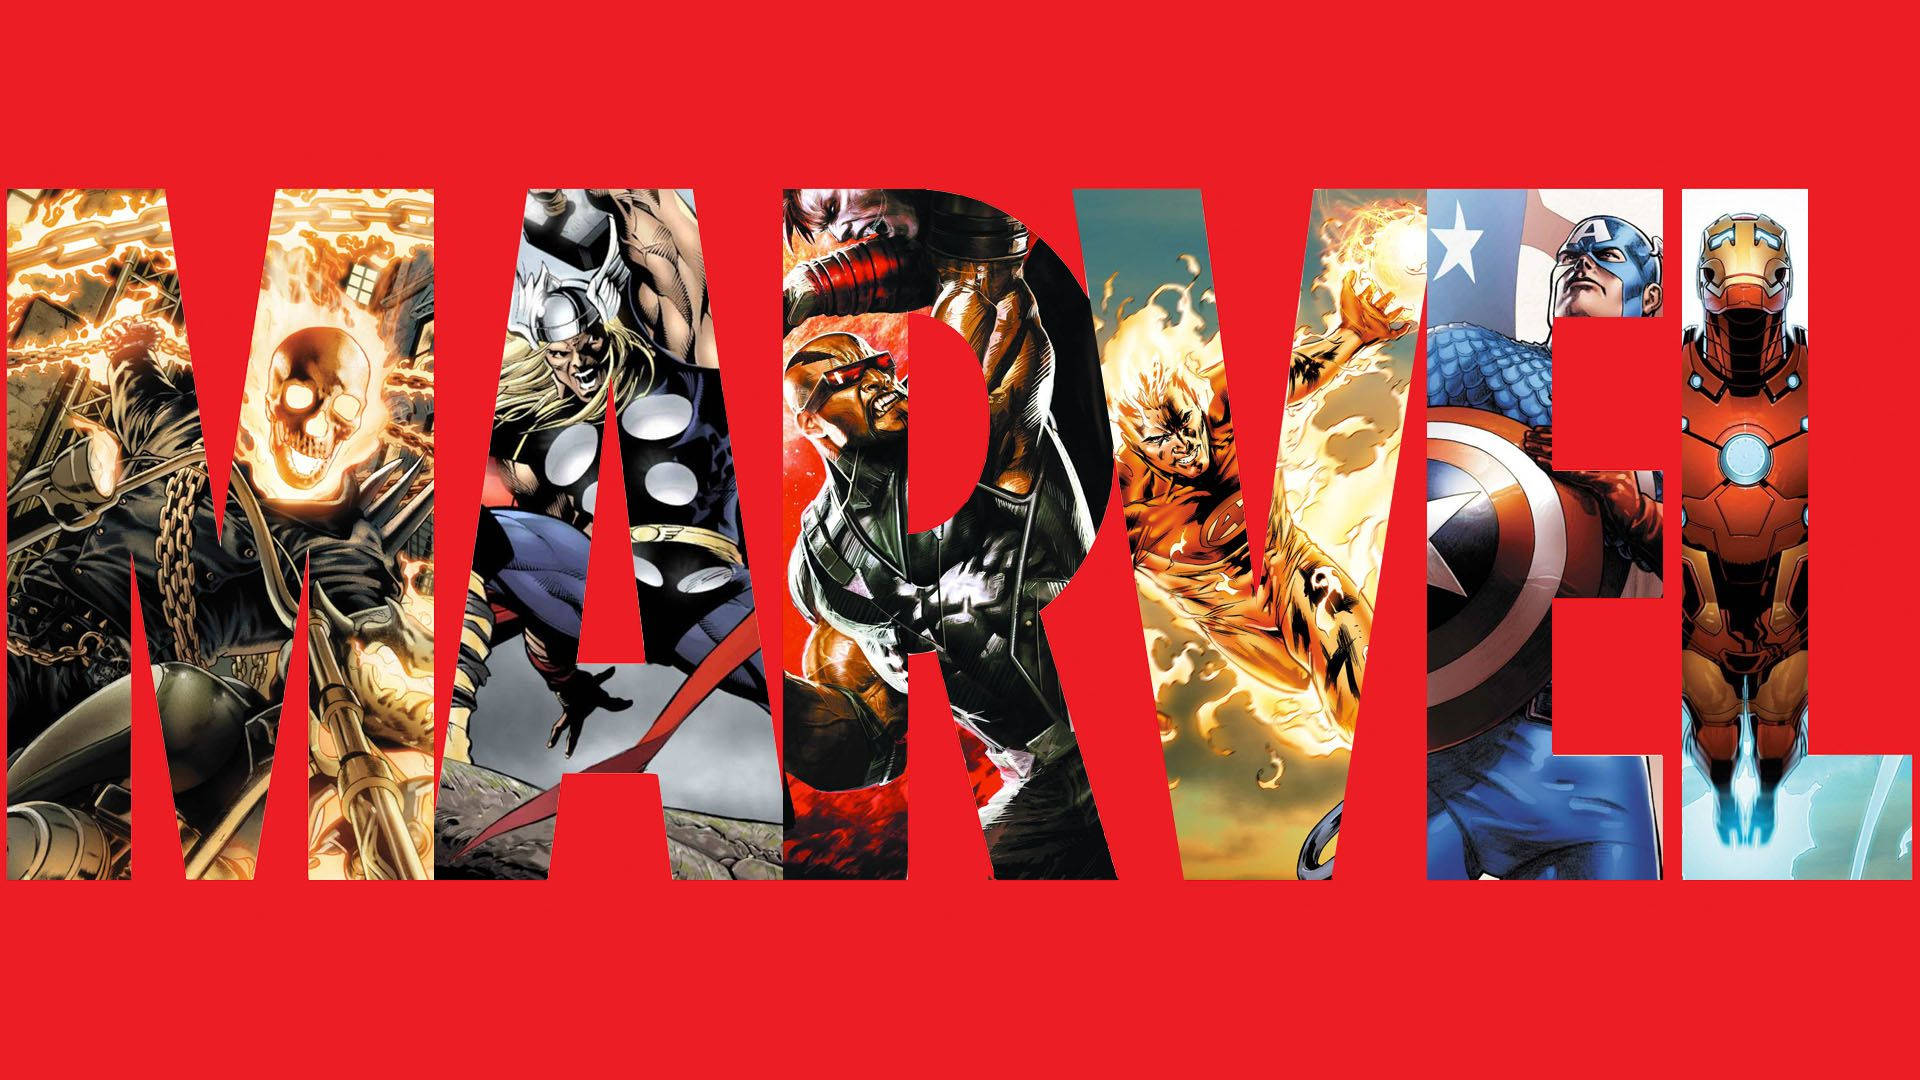 Get ready for an exciting new adventure with Marvel! Wallpaper